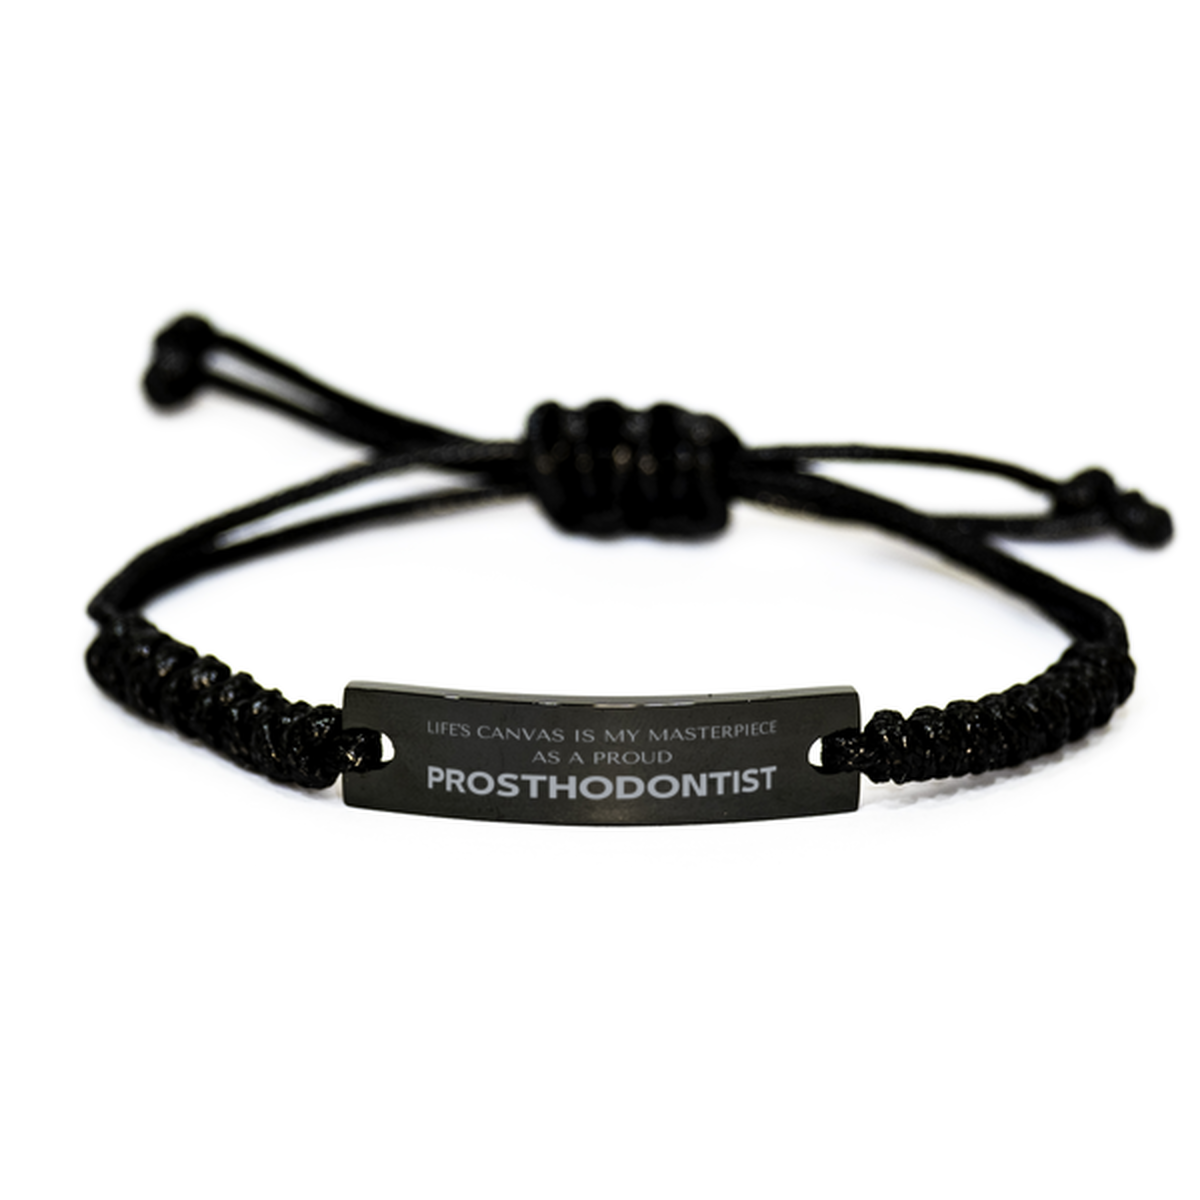 Proud Prosthodontist Gifts, Life's canvas is my masterpiece, Epic Birthday Christmas Unique Black Rope Bracelet For Prosthodontist, Coworkers, Men, Women, Friends